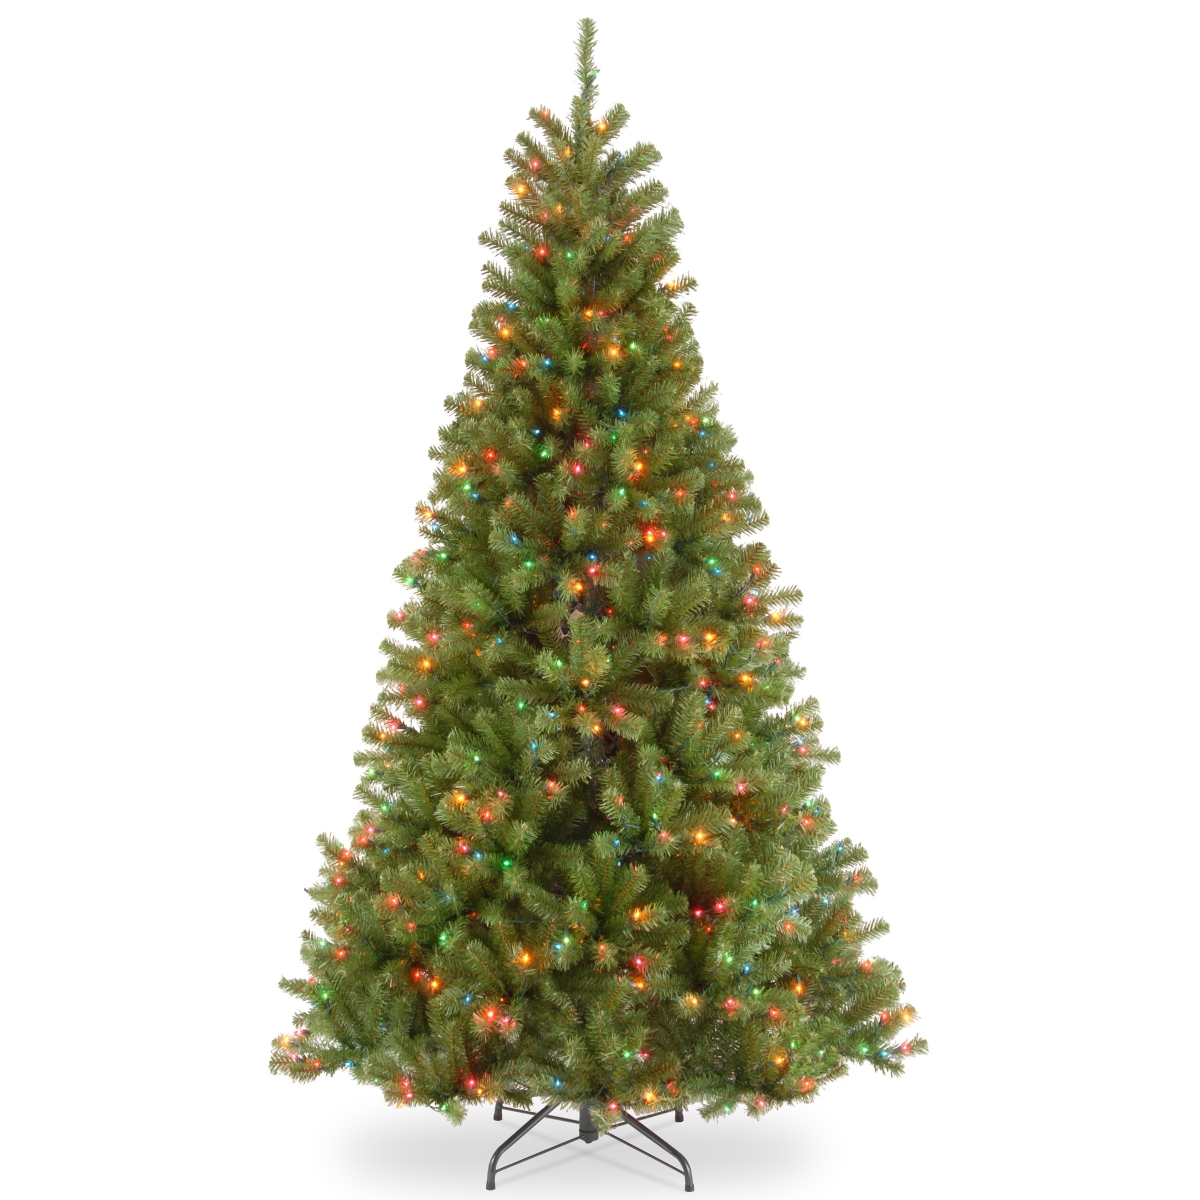 National Tree Nrv7-301-65 6.5 Ft. North Valley Spruce Tree With 450 Multicolor Lights